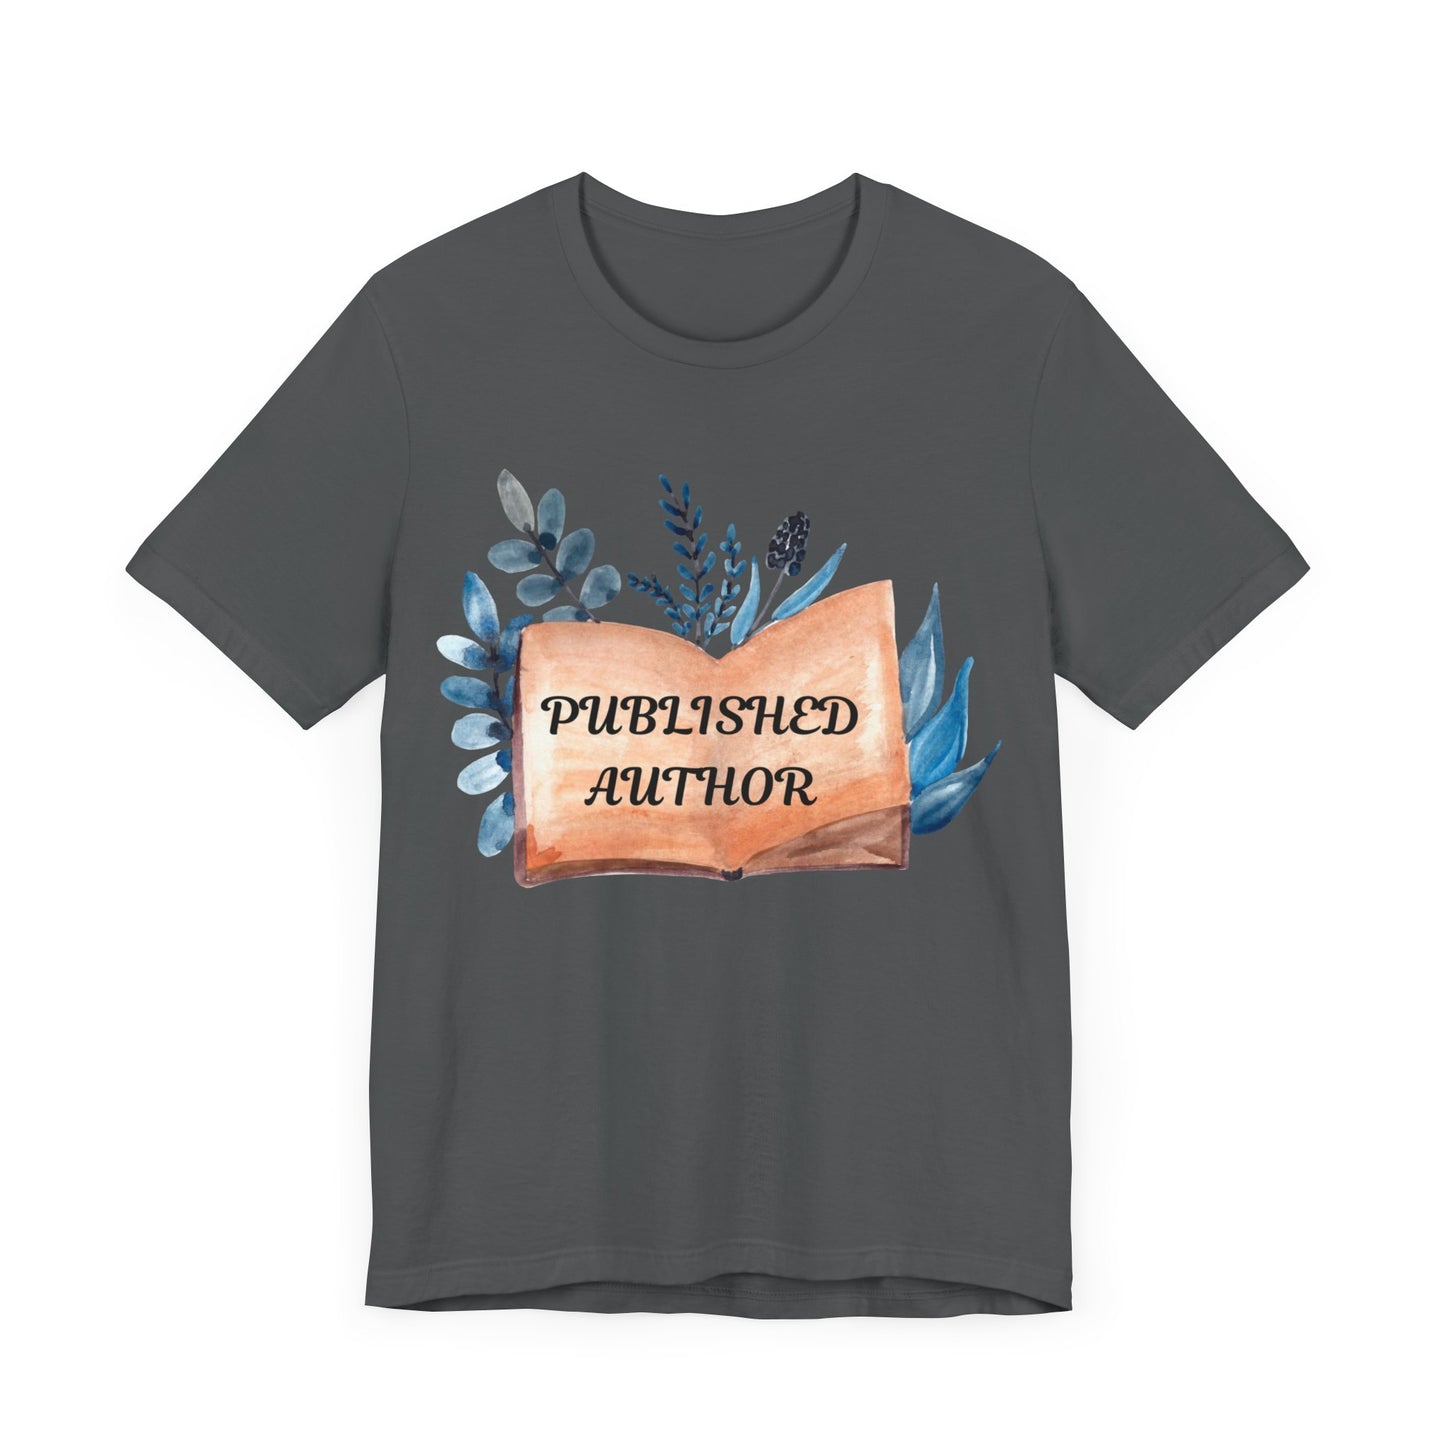 Published Author Tee Shirt Nature & Book